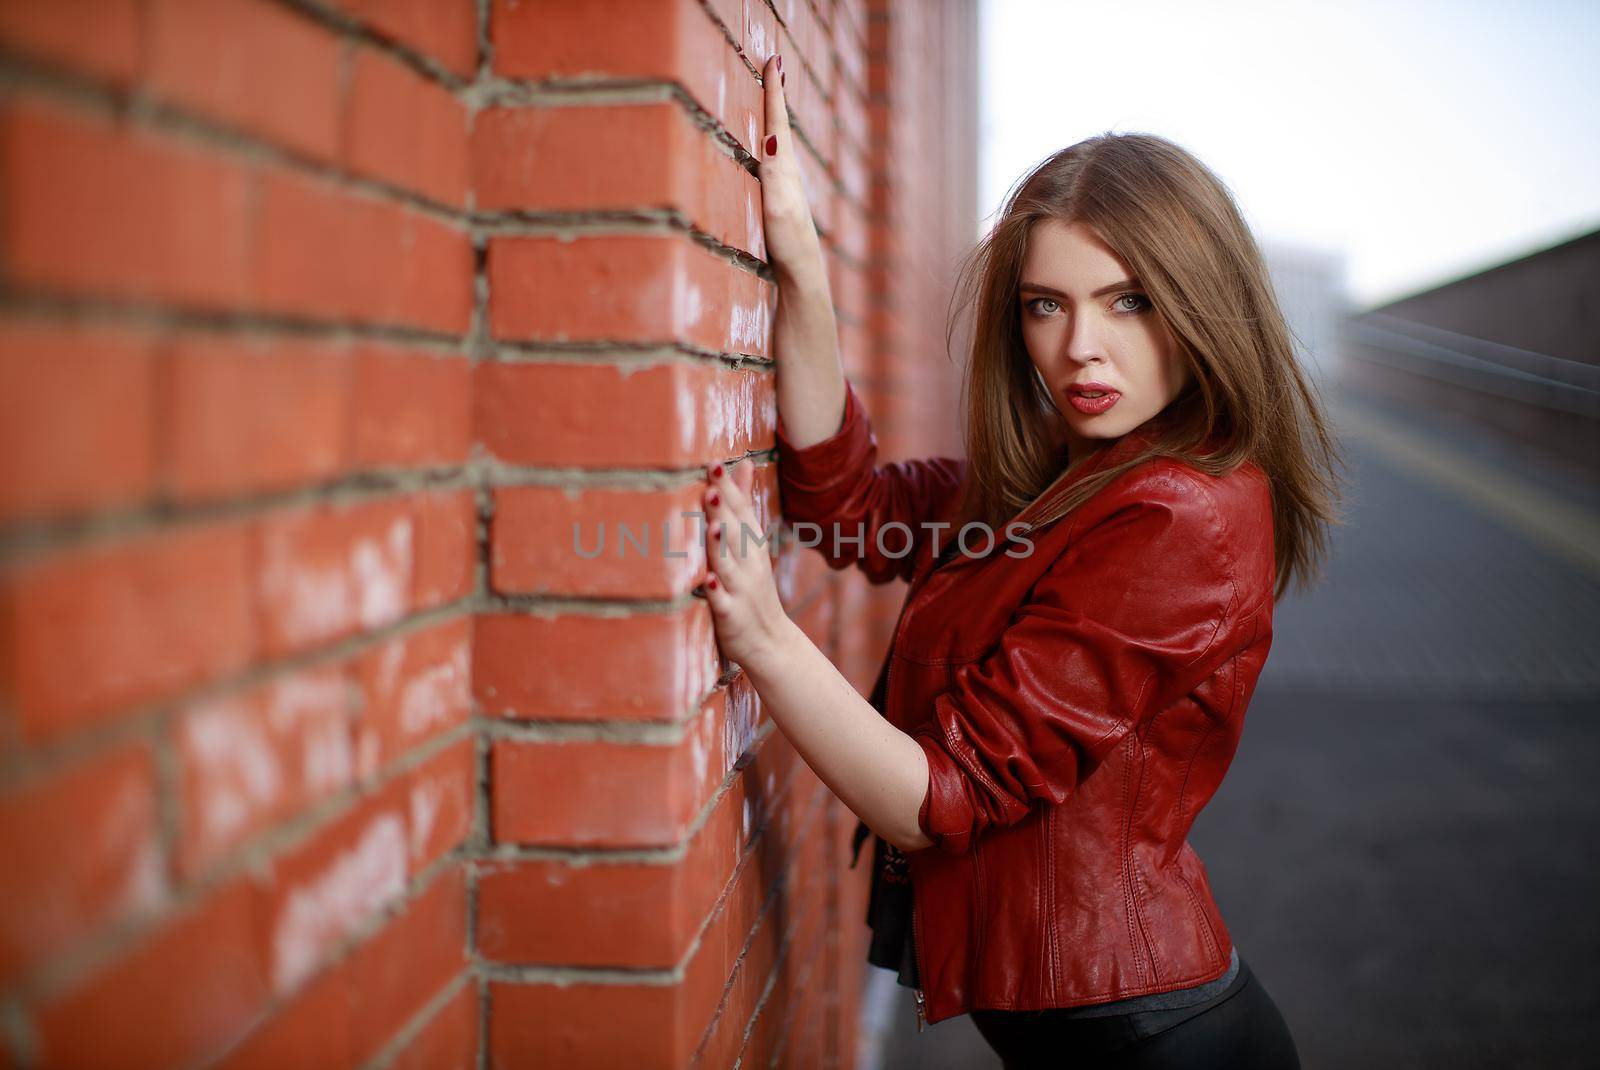 Portrait of young woman in black leggings and red leather jacket standing near red brick wall